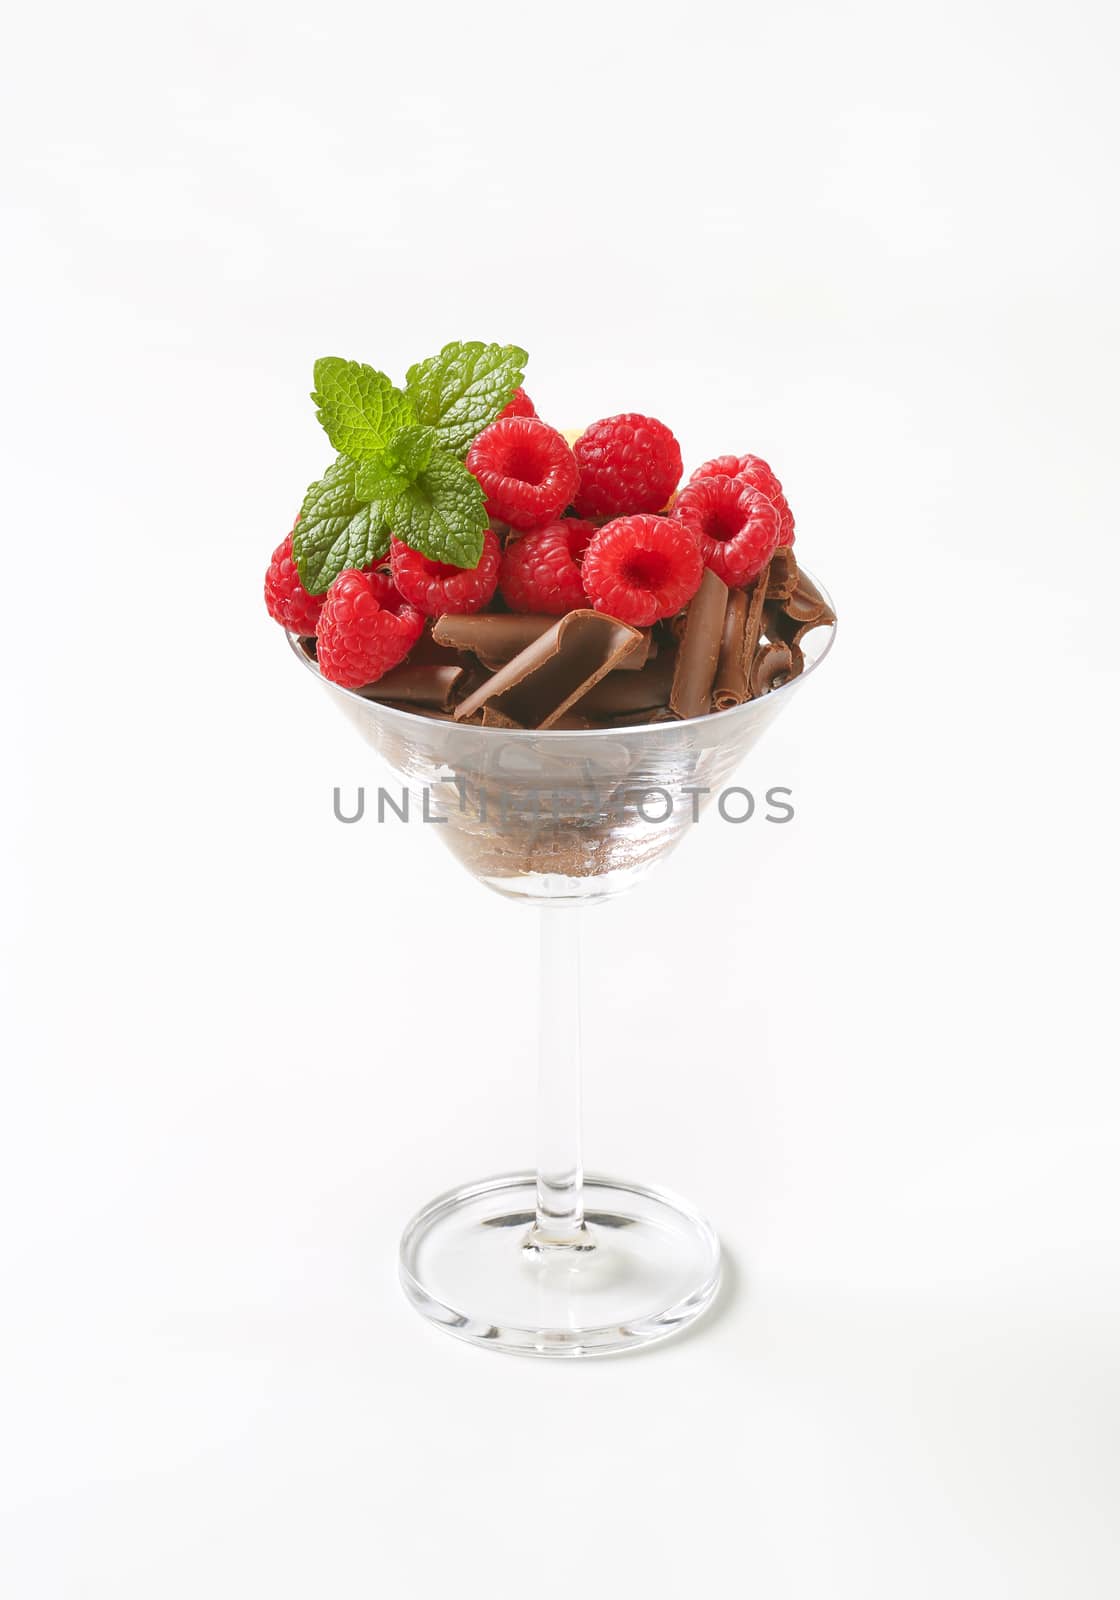 Chocolate curls with fresh raspberries in stemmed glass